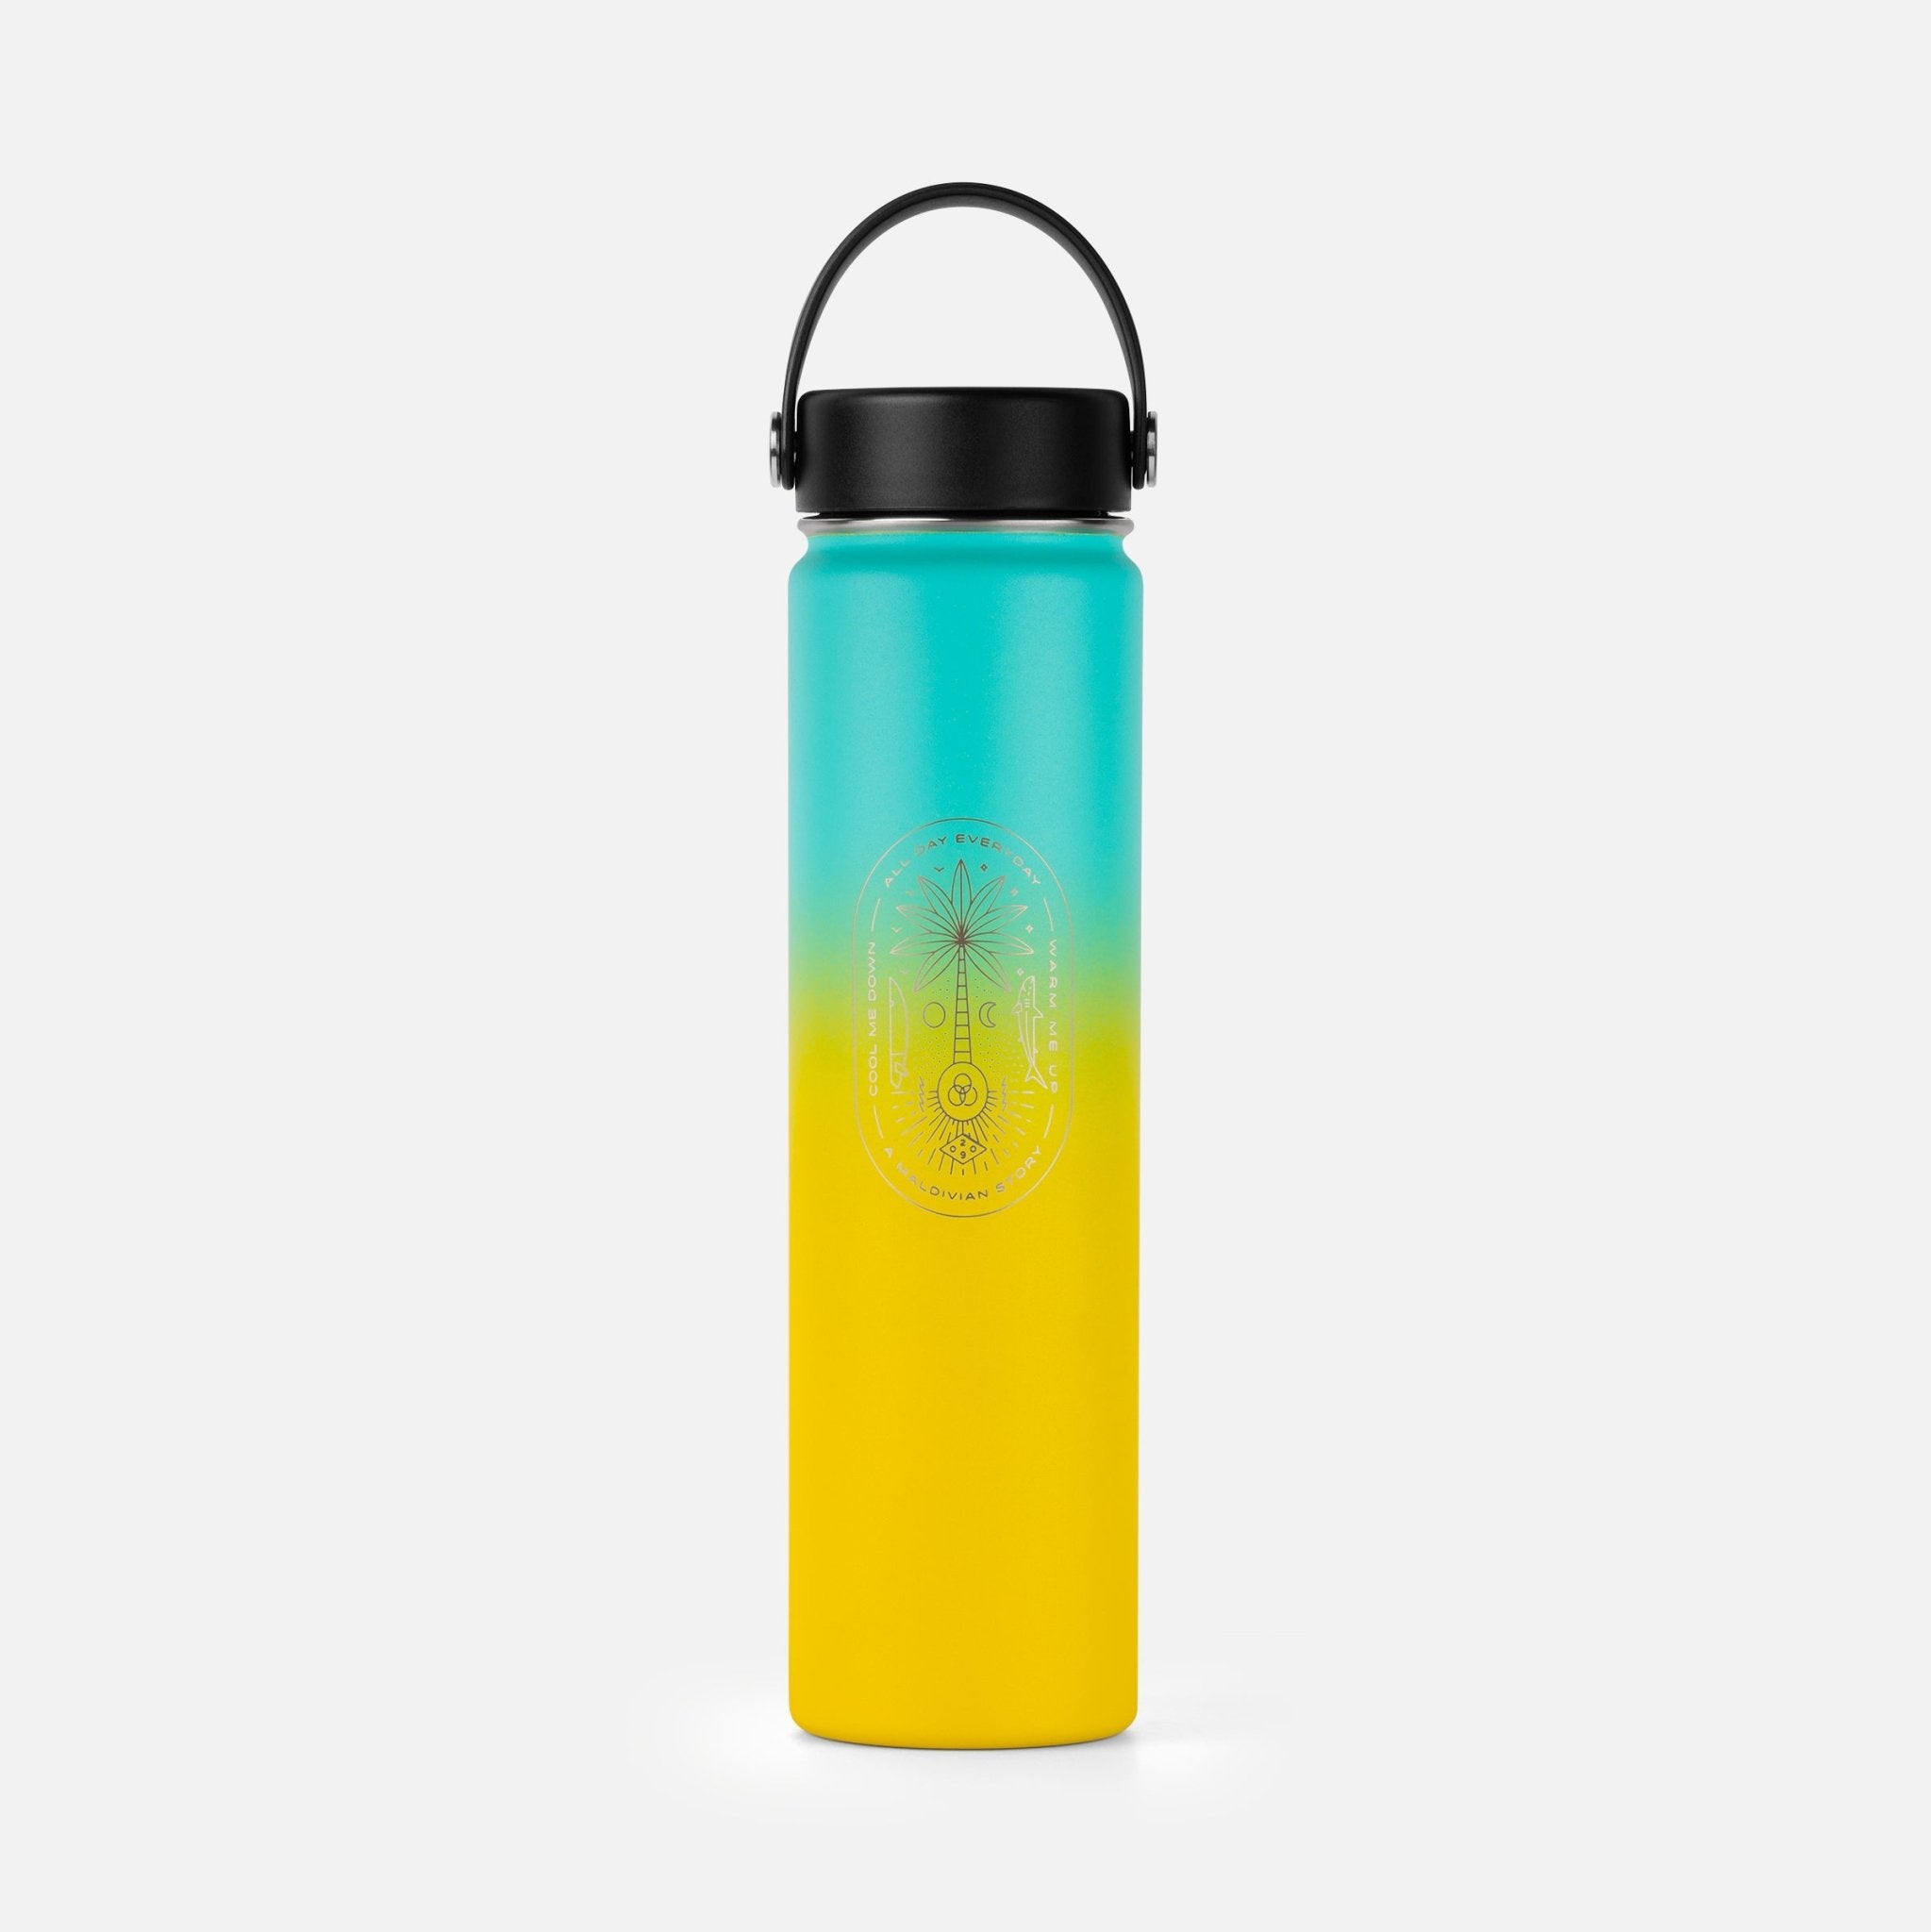 Reusable Flask - 750ml - Valenica - Thermos & Reusable Flask | Toddy